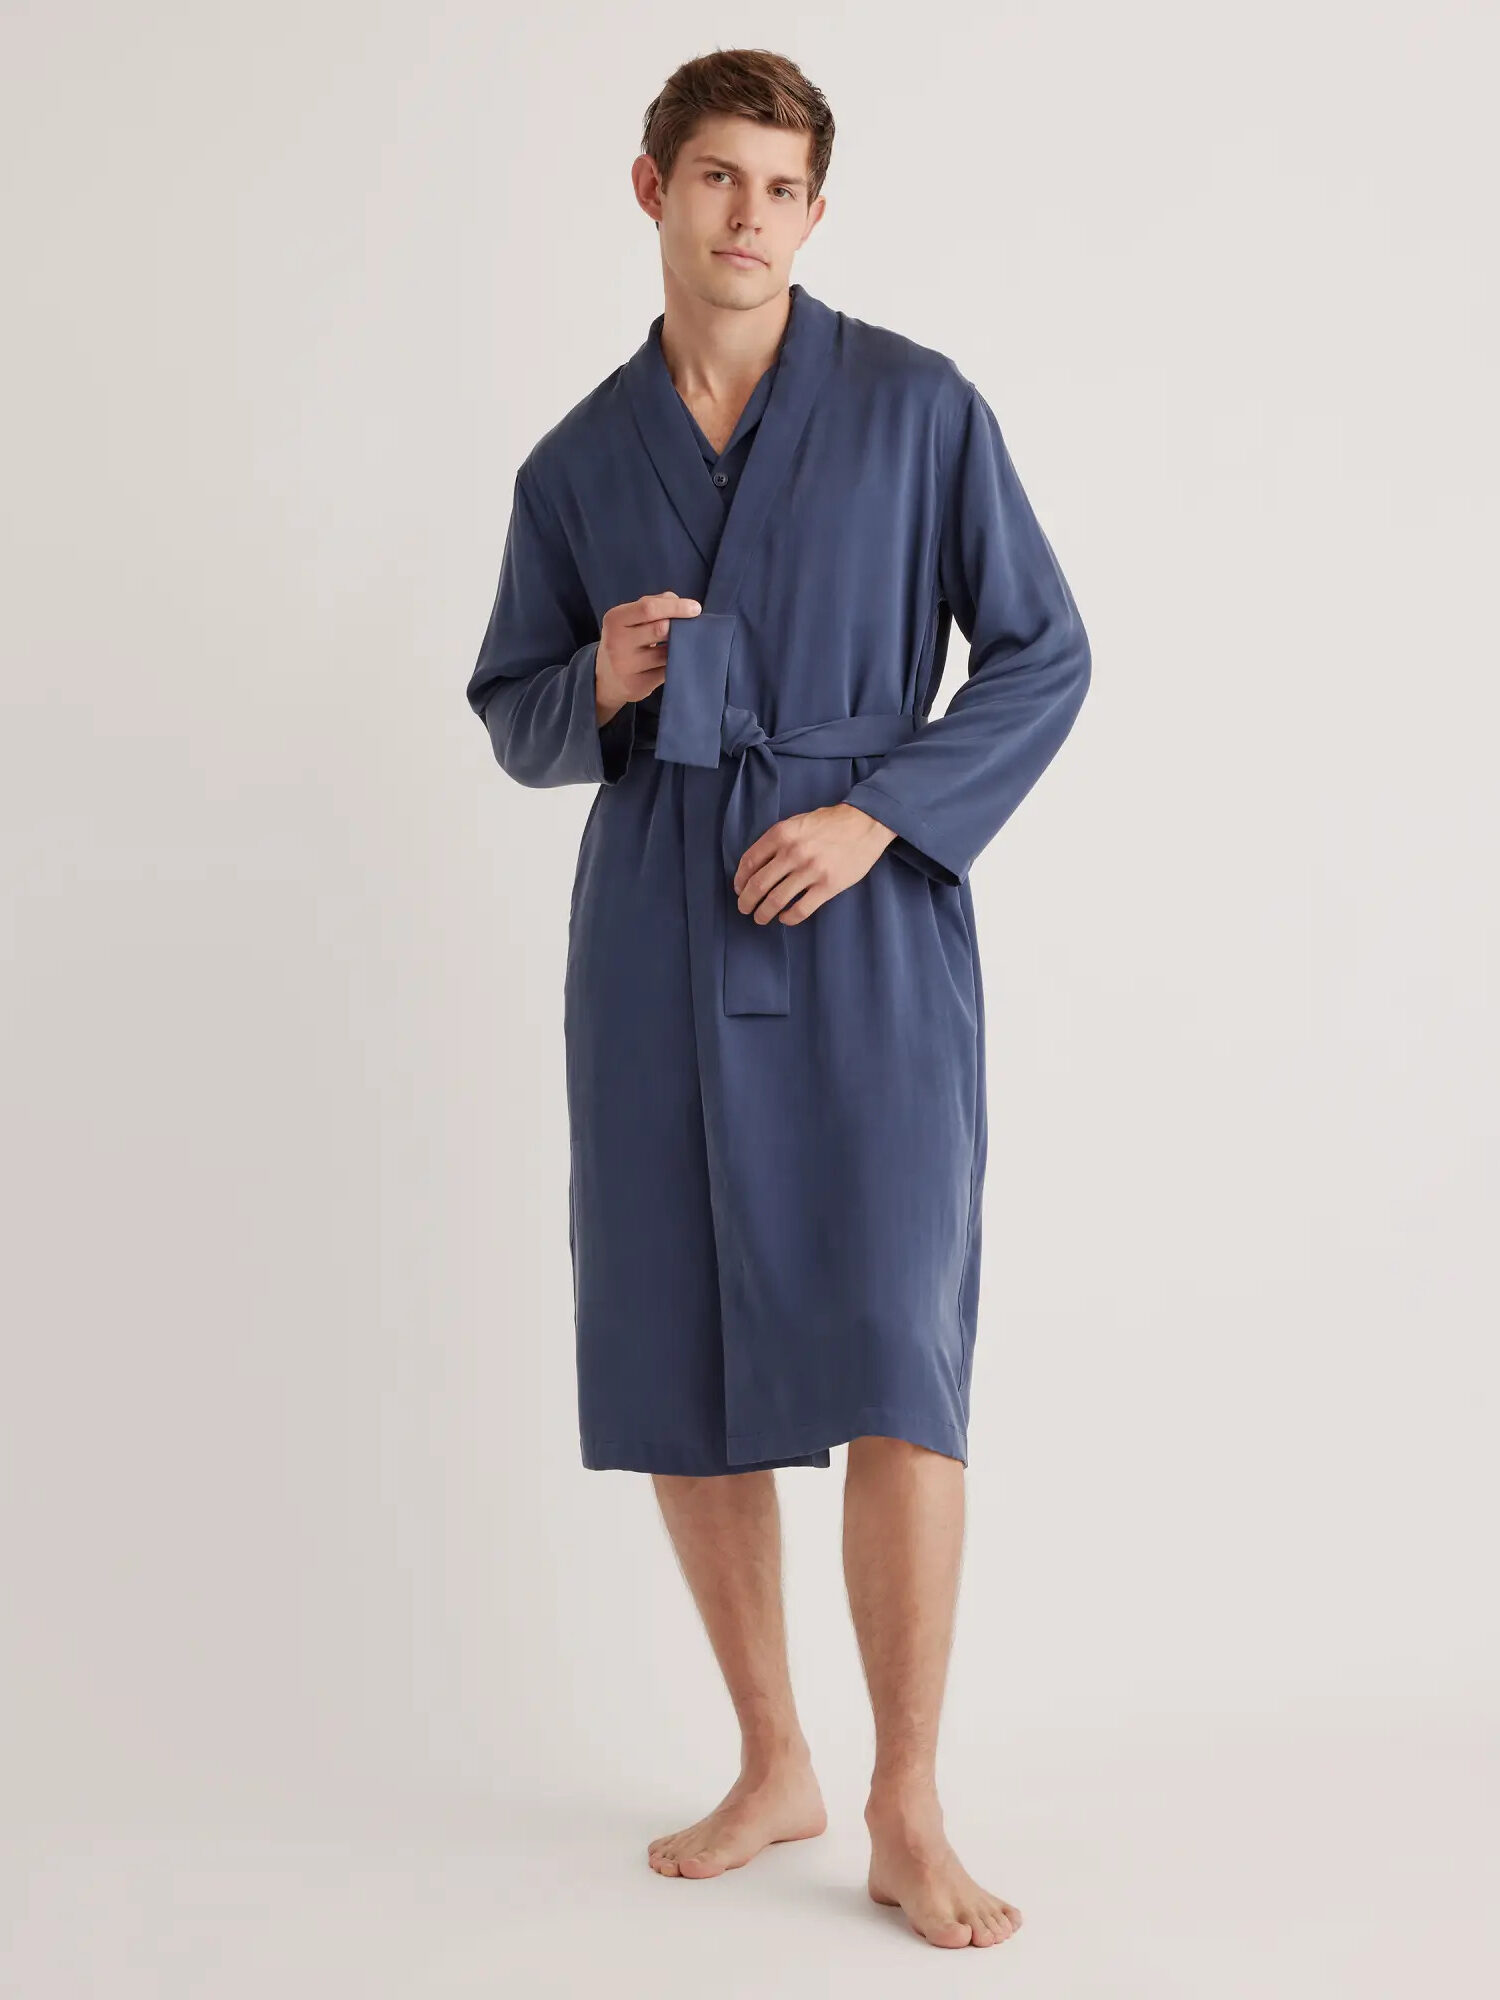 A model wearing Quince's washable silk robe in blue.